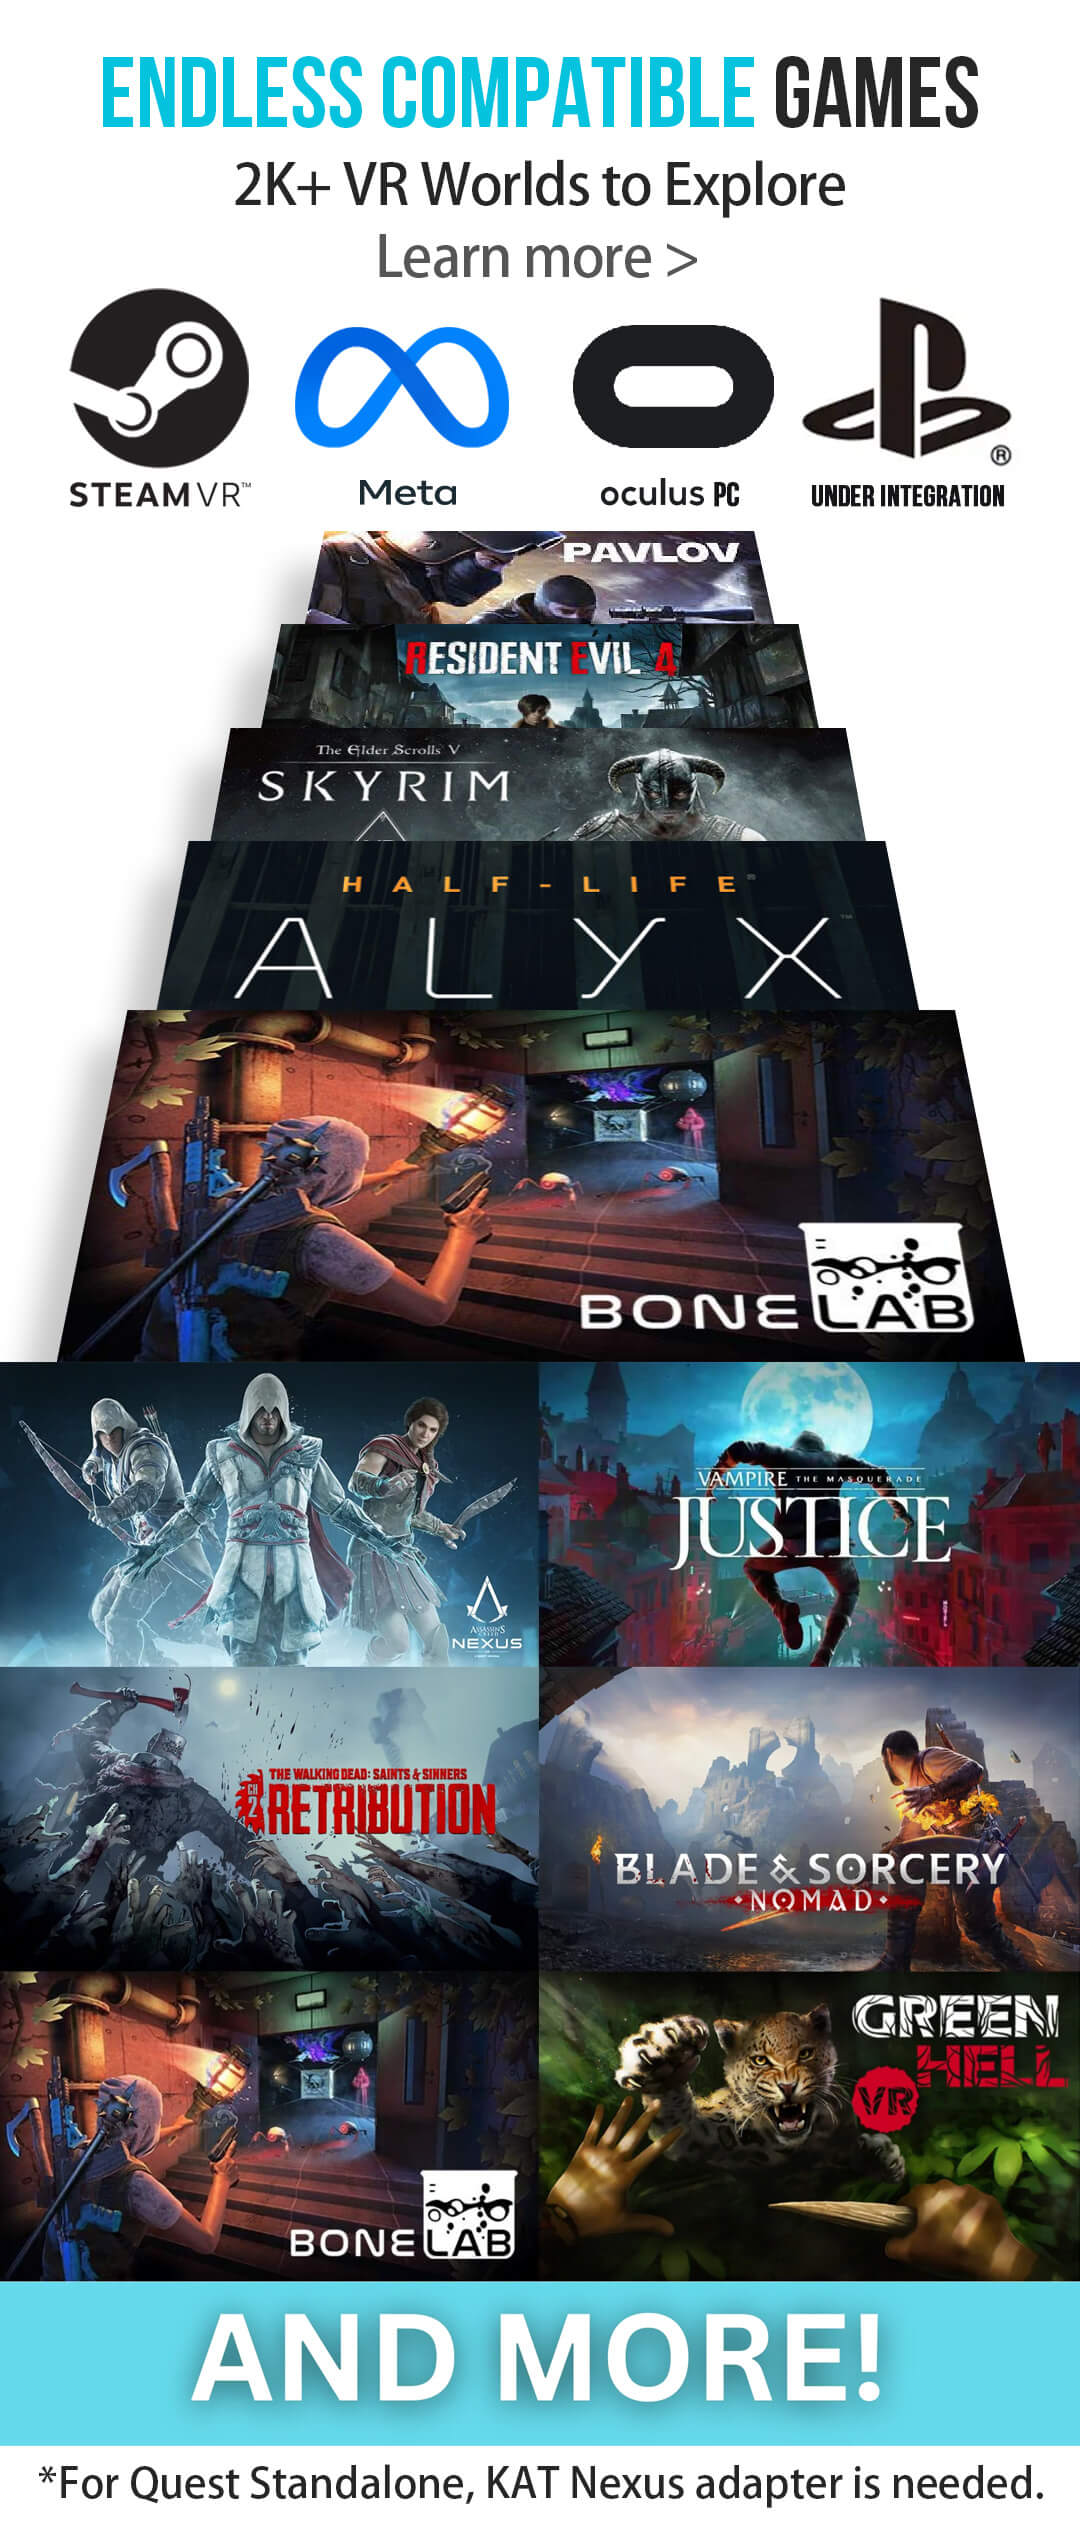 Slideshow: 6 Fantastic VR Games to Play After Half-Life: Alyx